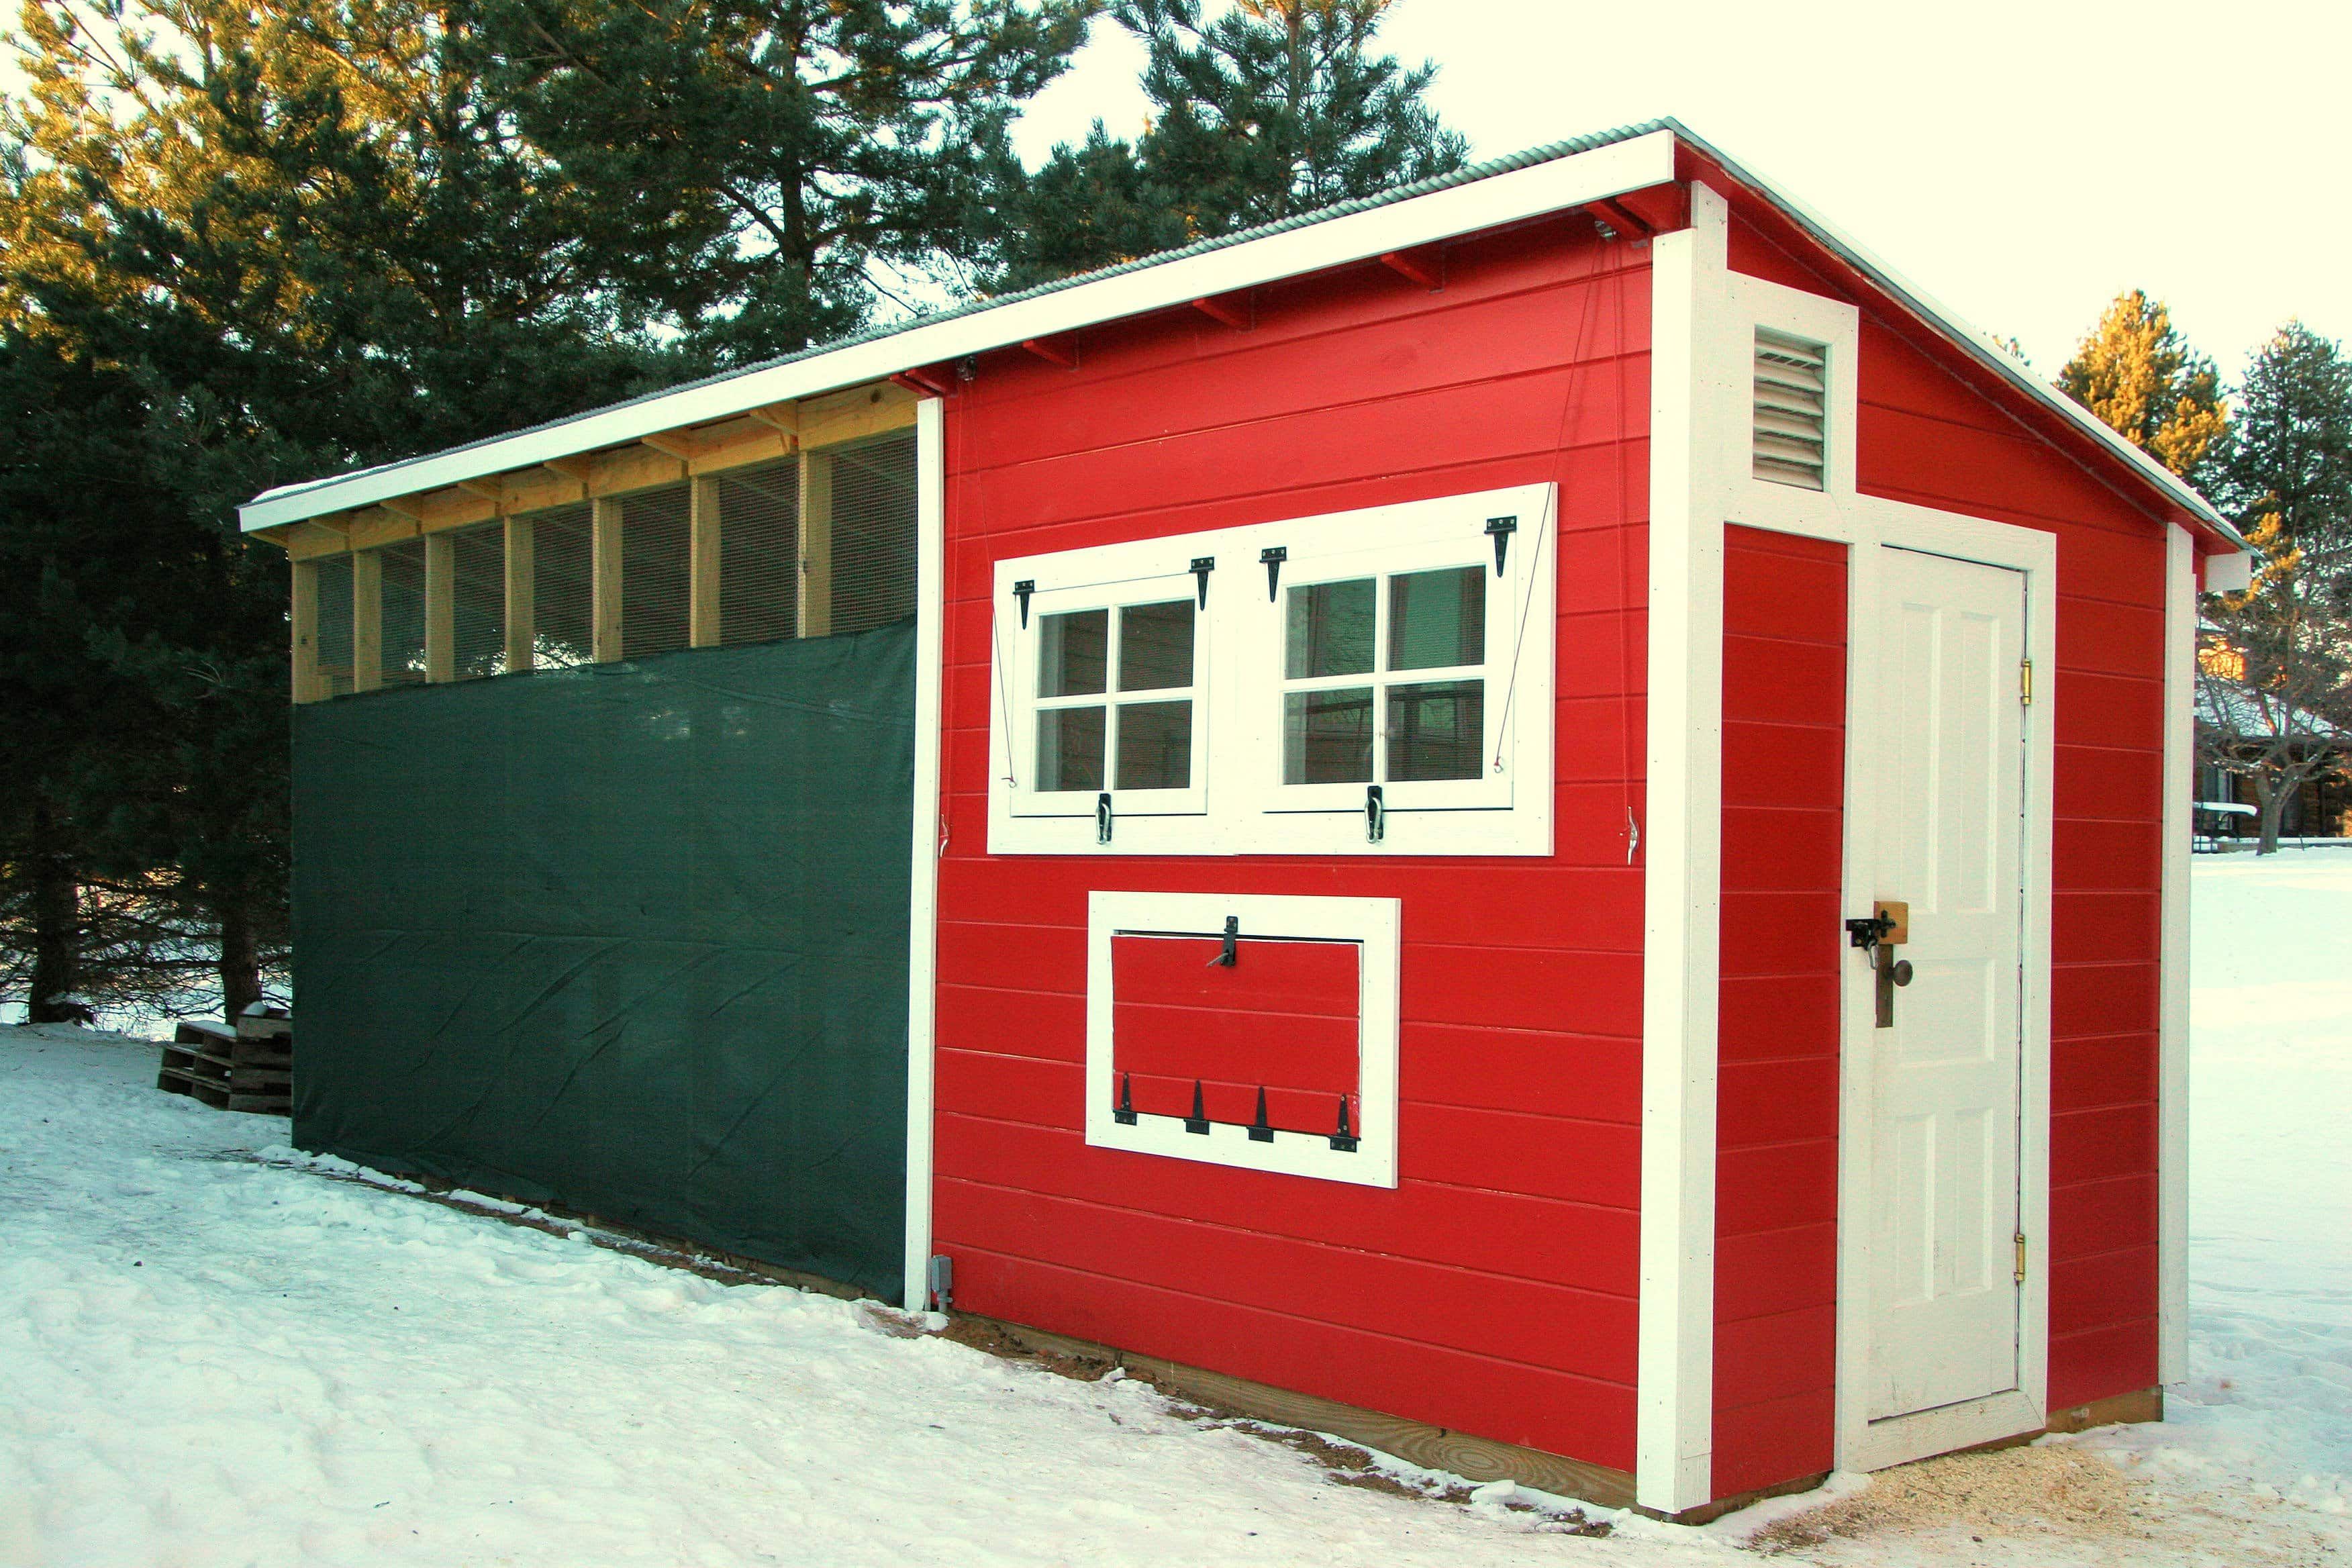 Chicken Coop With Run at the backyard in winter season